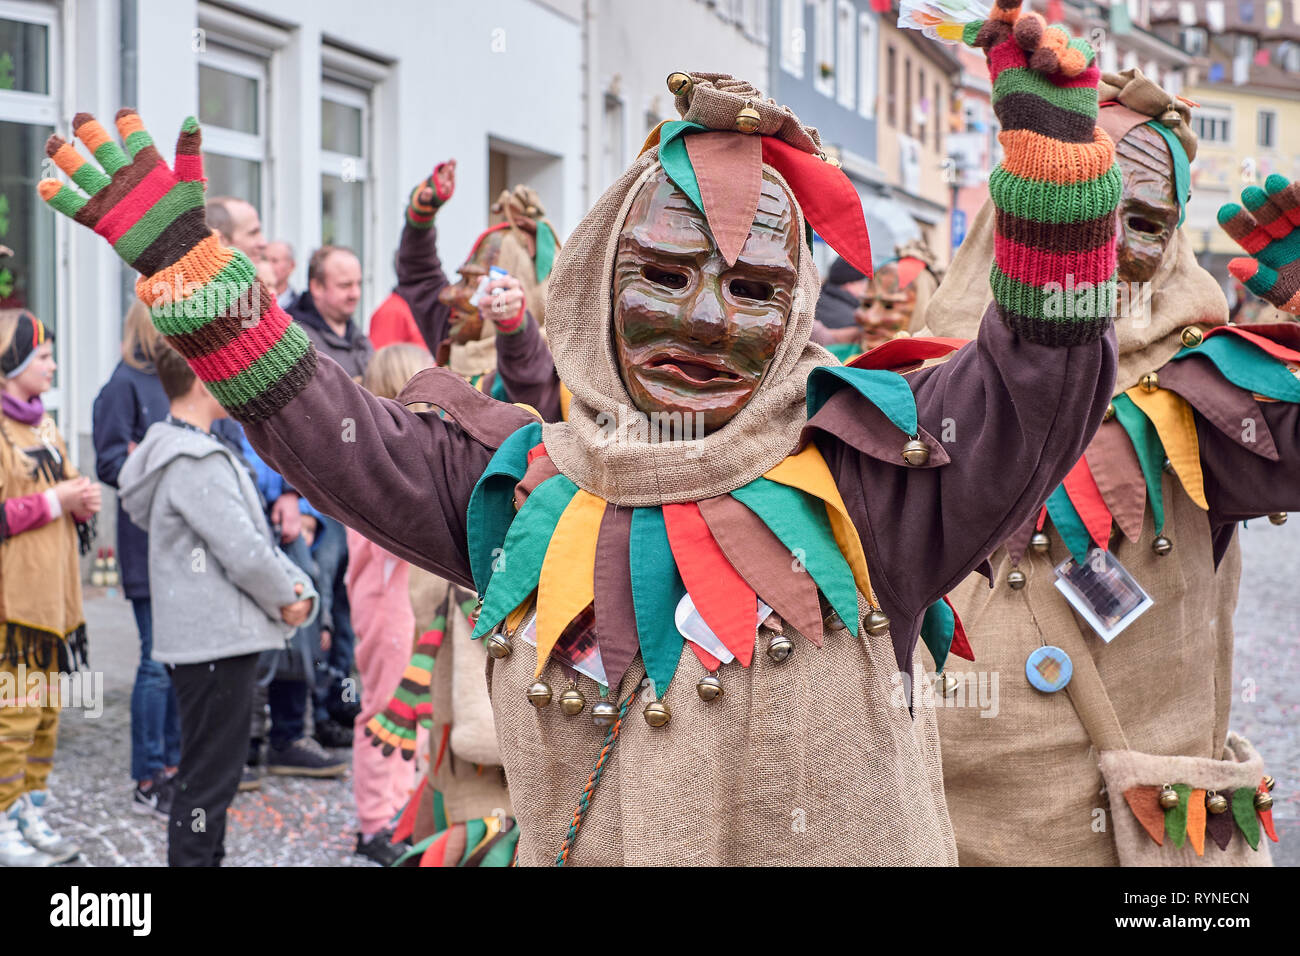 Carnival figure in a brown costume raises both arms. Street Carnival in Southern Germany - Black Forest. Stock Photo